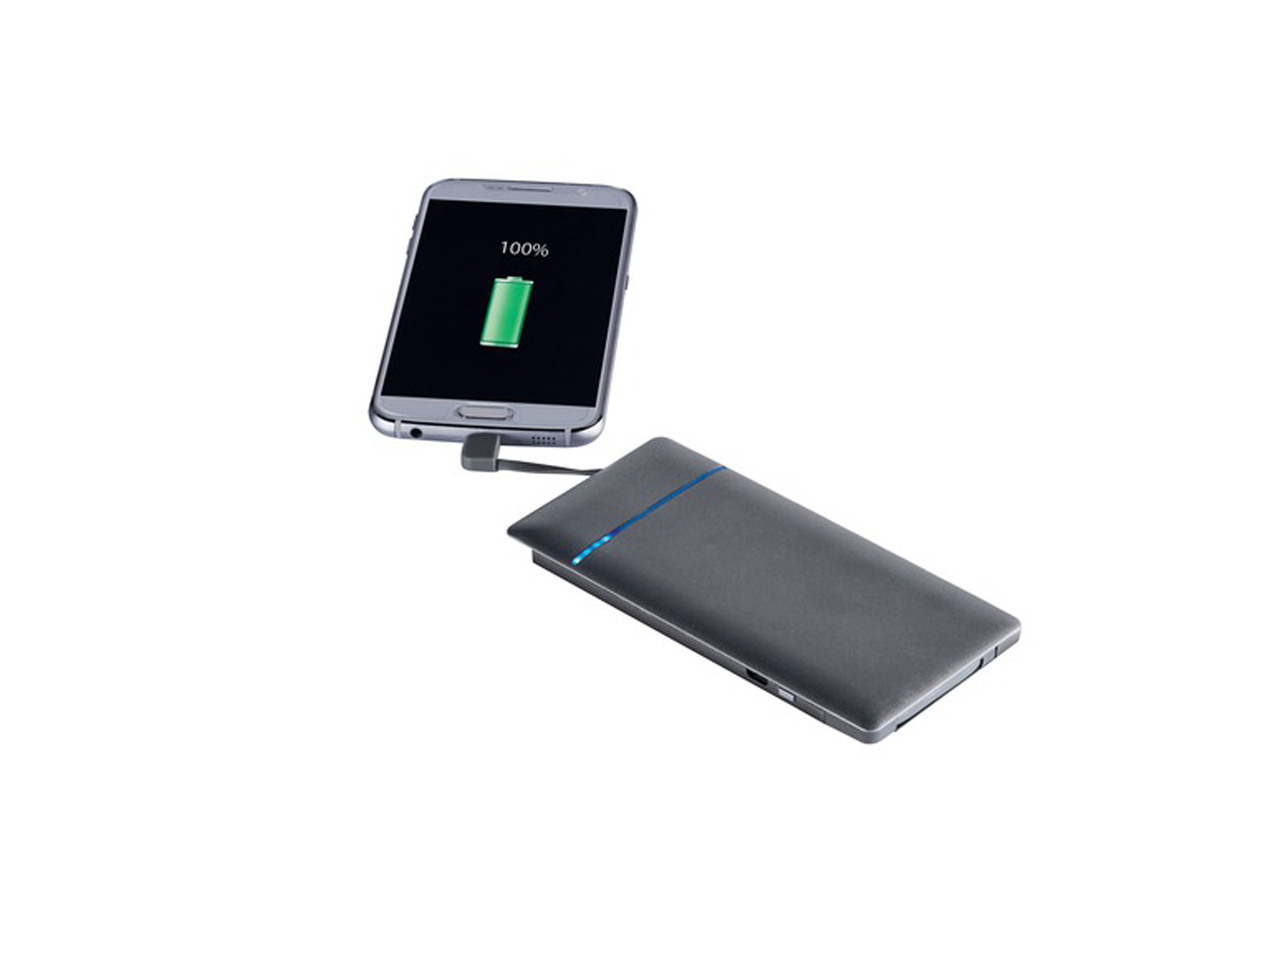 Power Bank with Integrated Cables